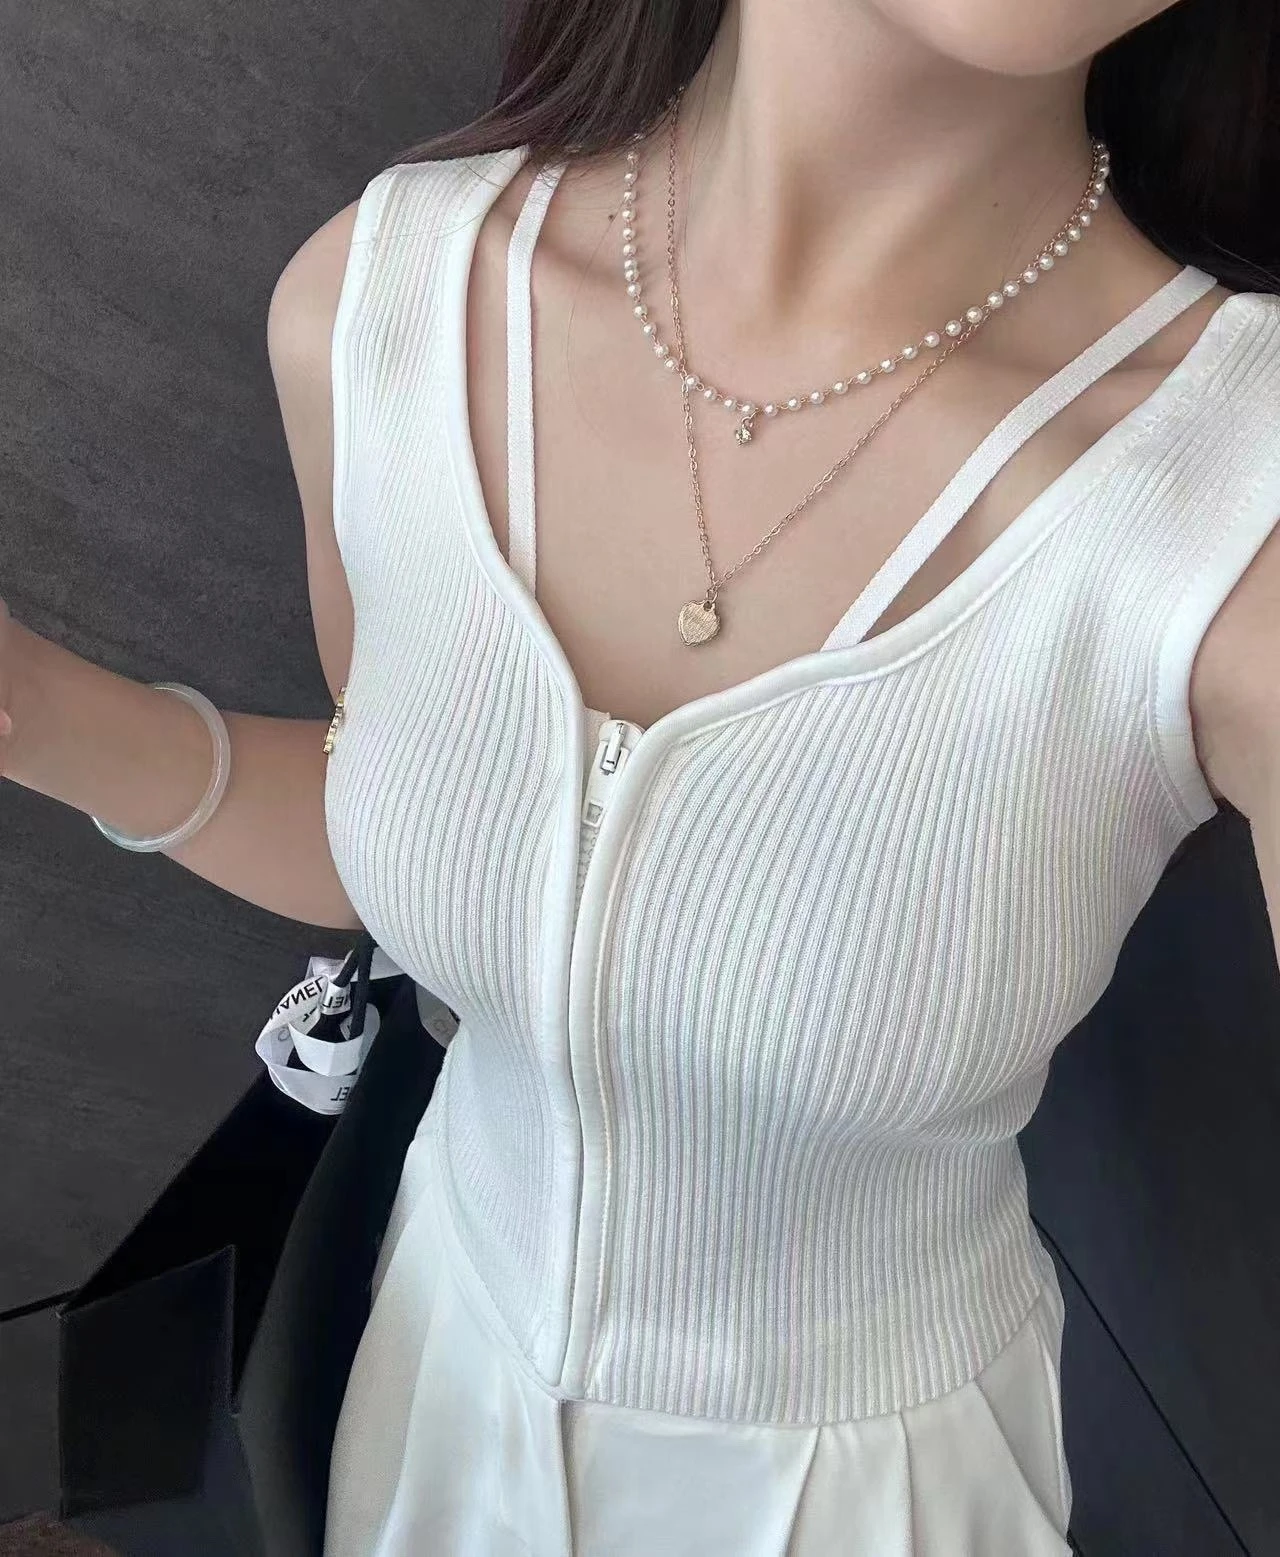 

V-neck Tank Top Woman Cropped Cute Camis Sexy Lady White Crop Tops Female Korean Sleeveless Zip Style Women's Cloth Summer Tops